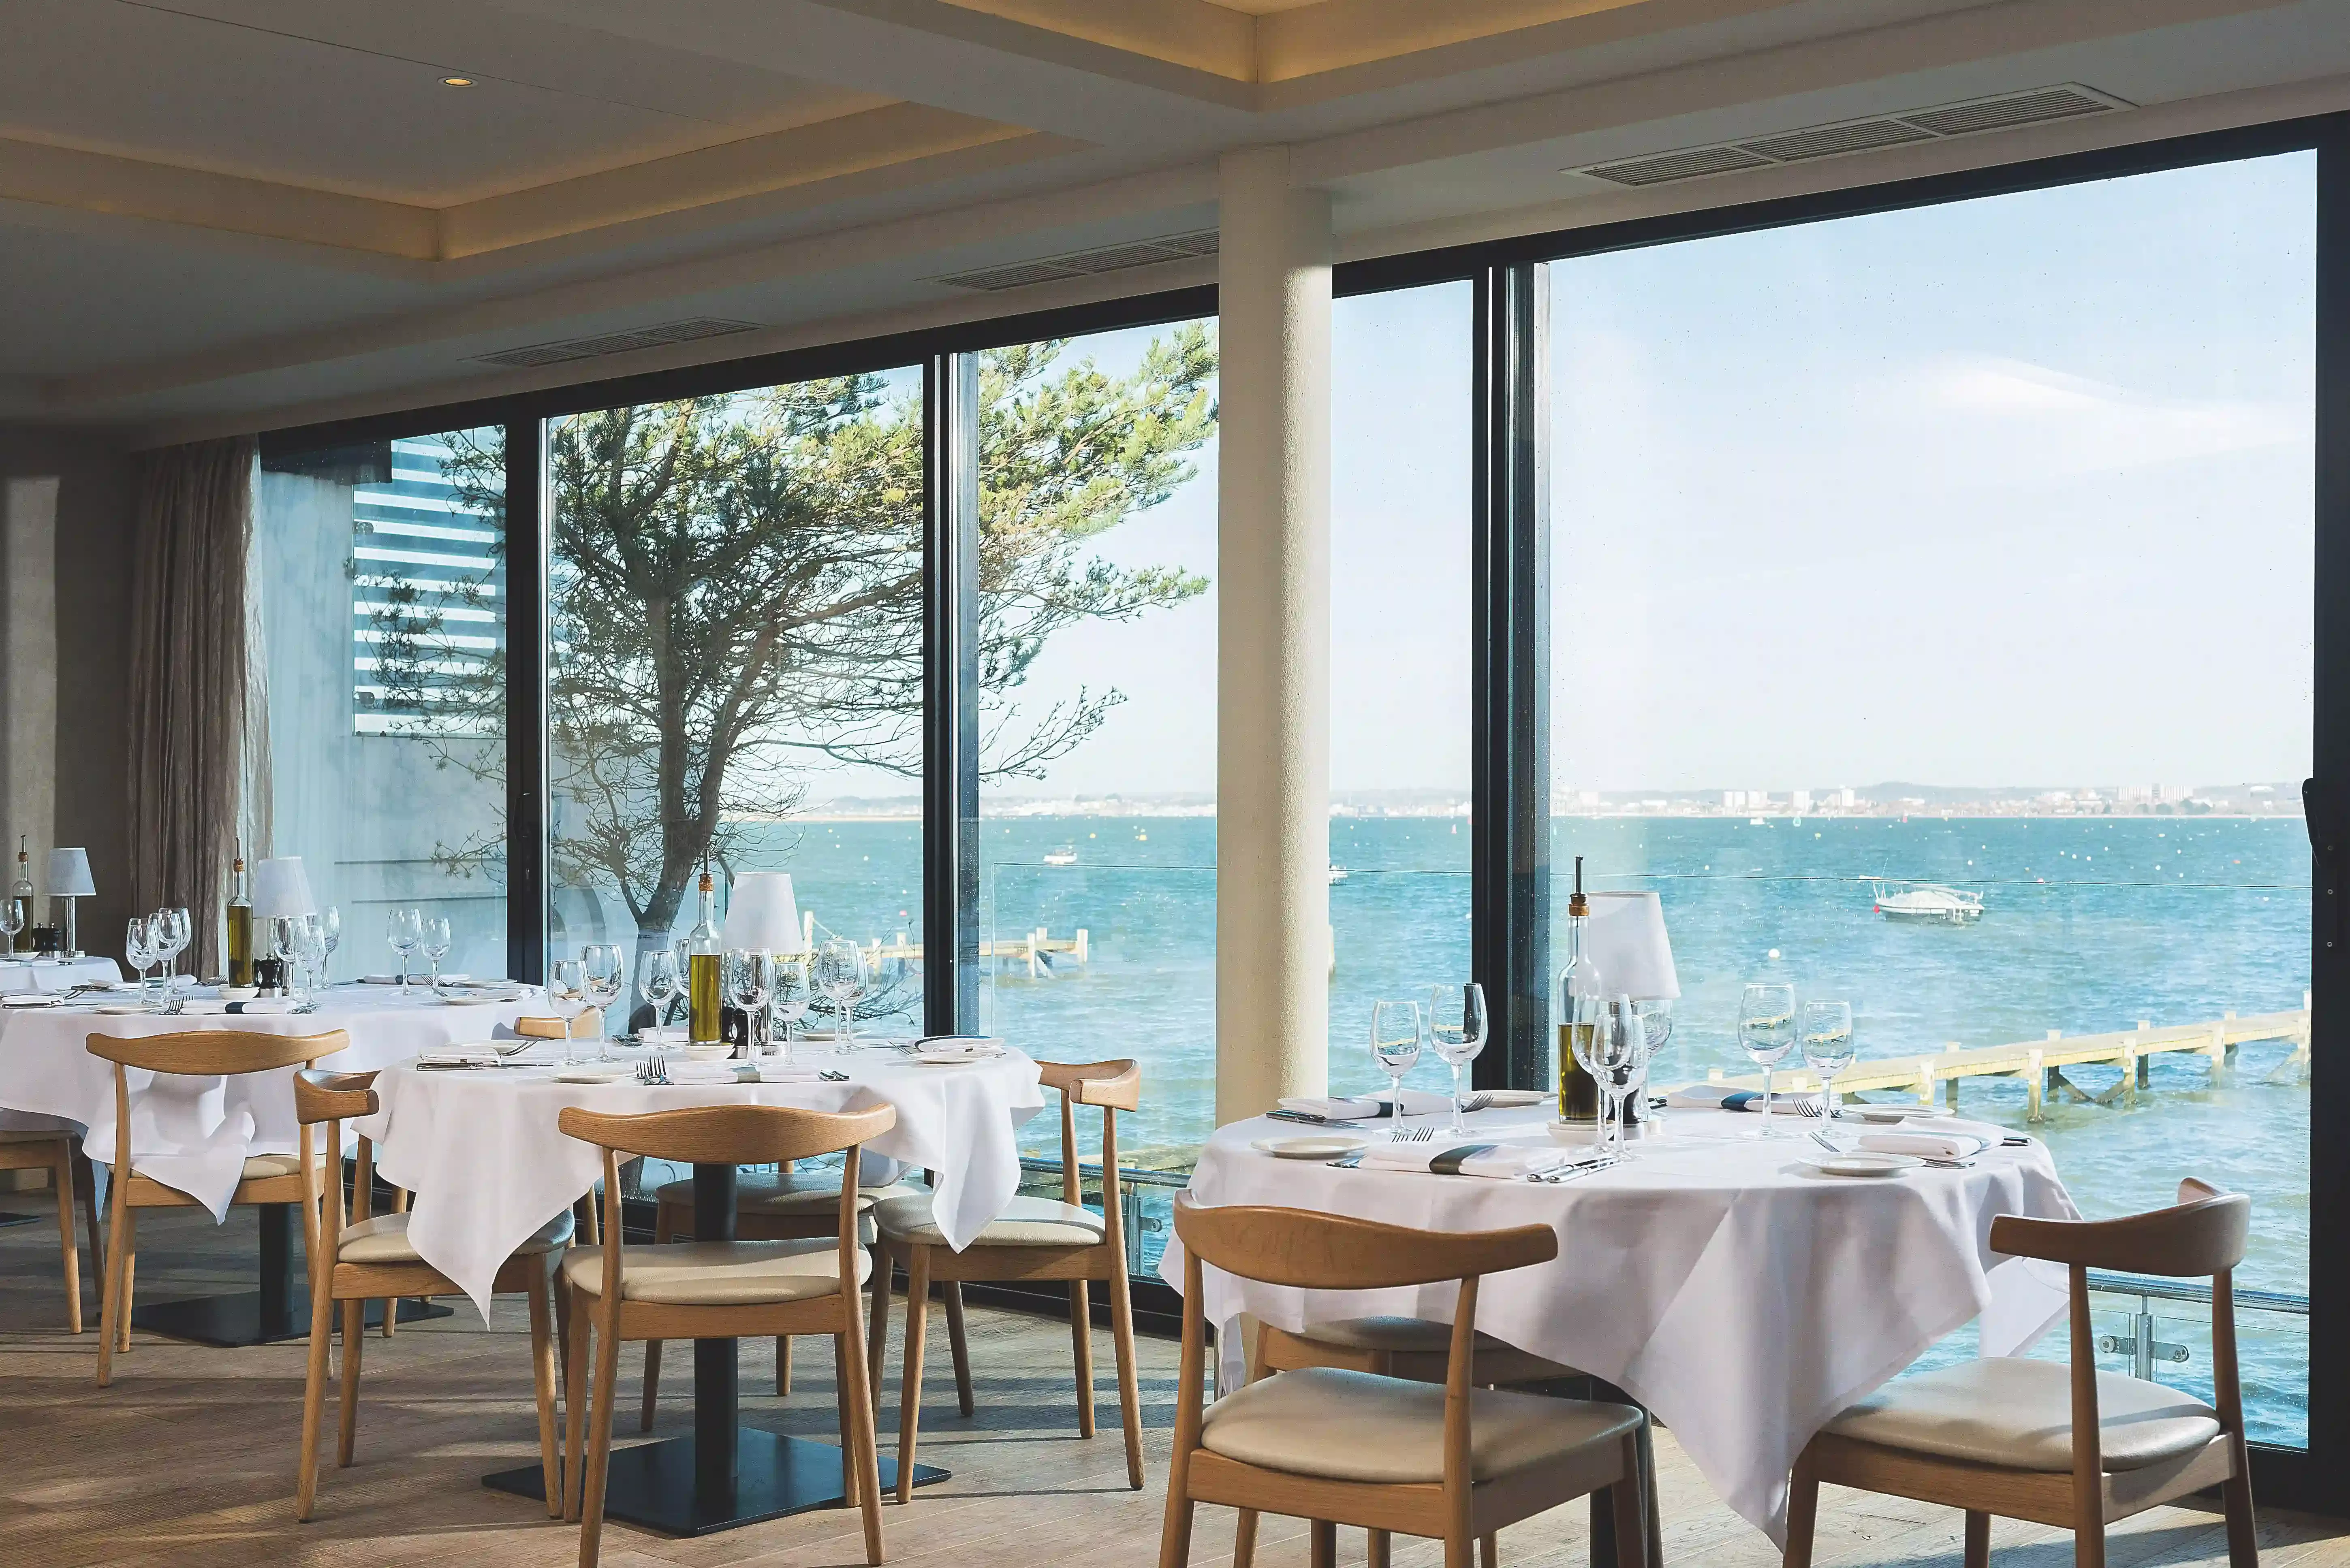 Inside interior of set round dining tables and chairs inside restaurant Rick Stein Sandbanks overlooking view of the sea.